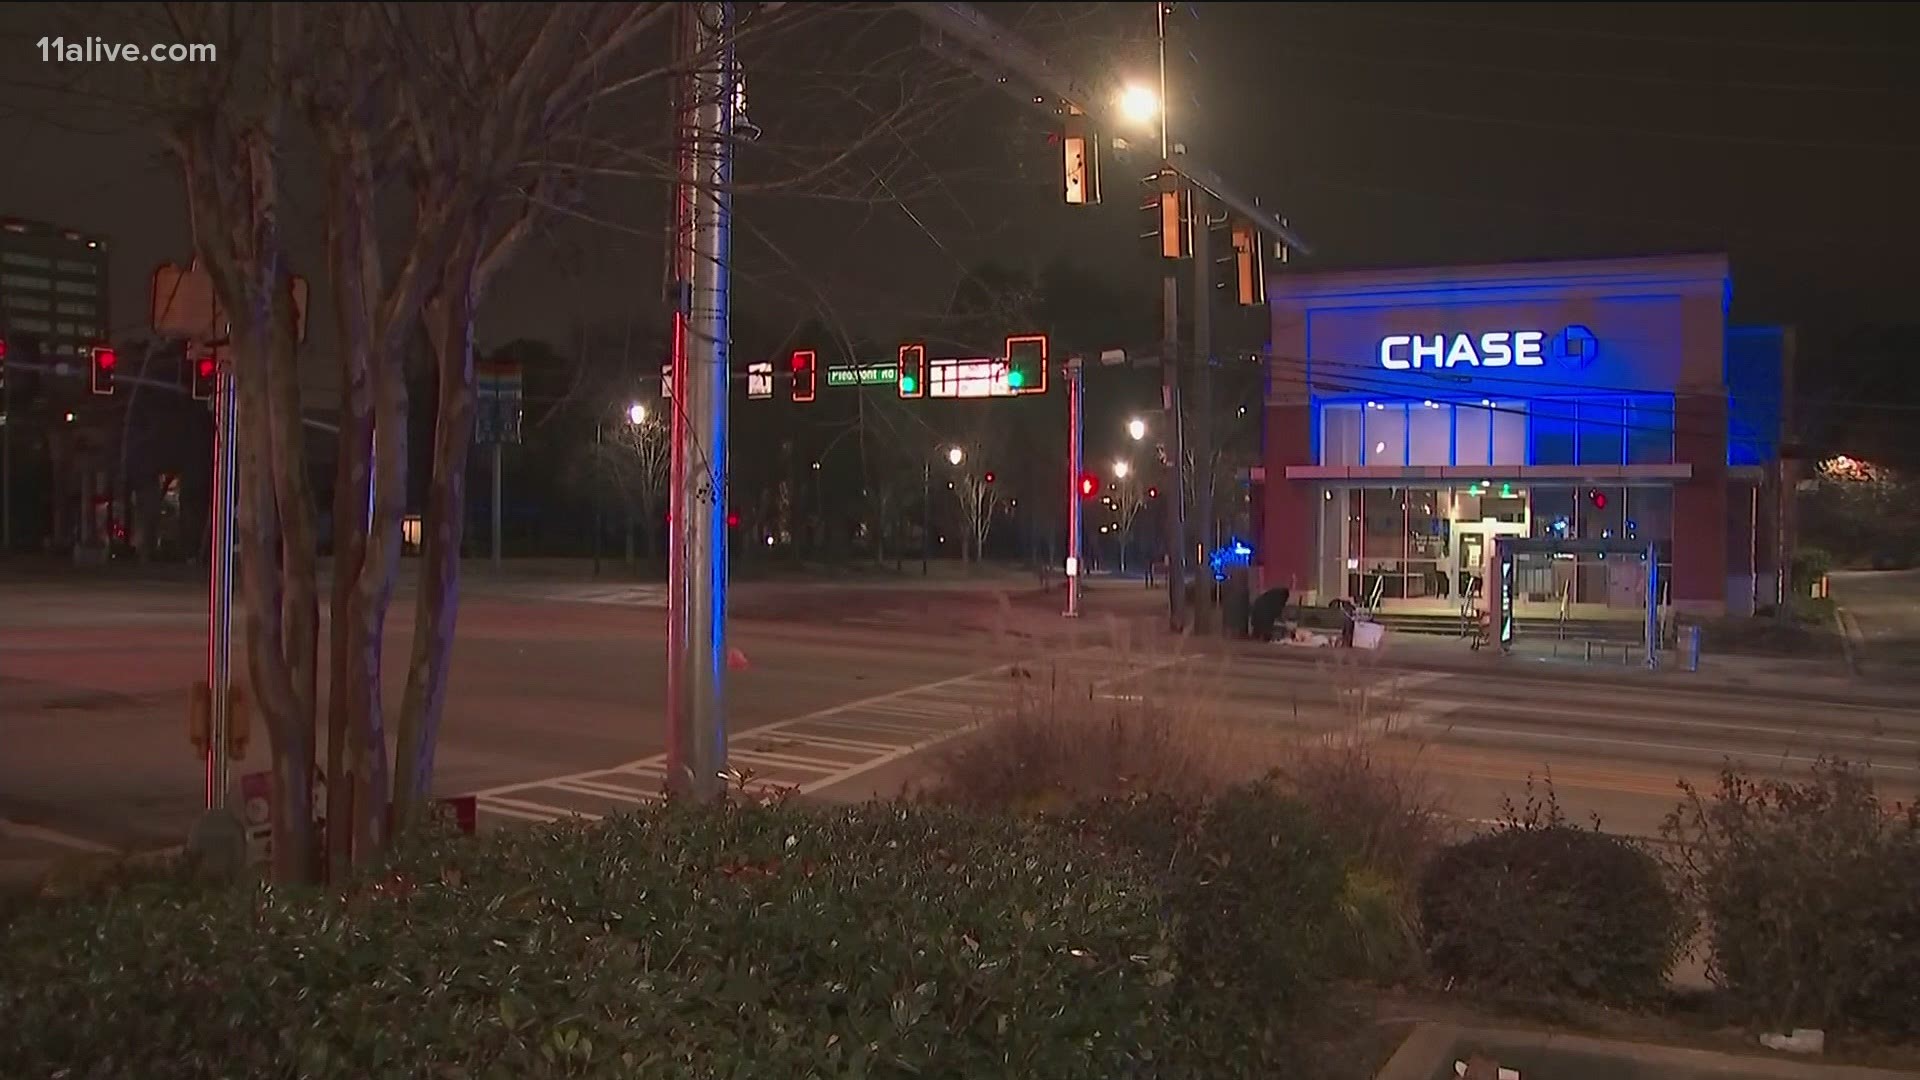 The victim was found at the intersection of Piedmont Rd. and Sidney Marcus Blvd.